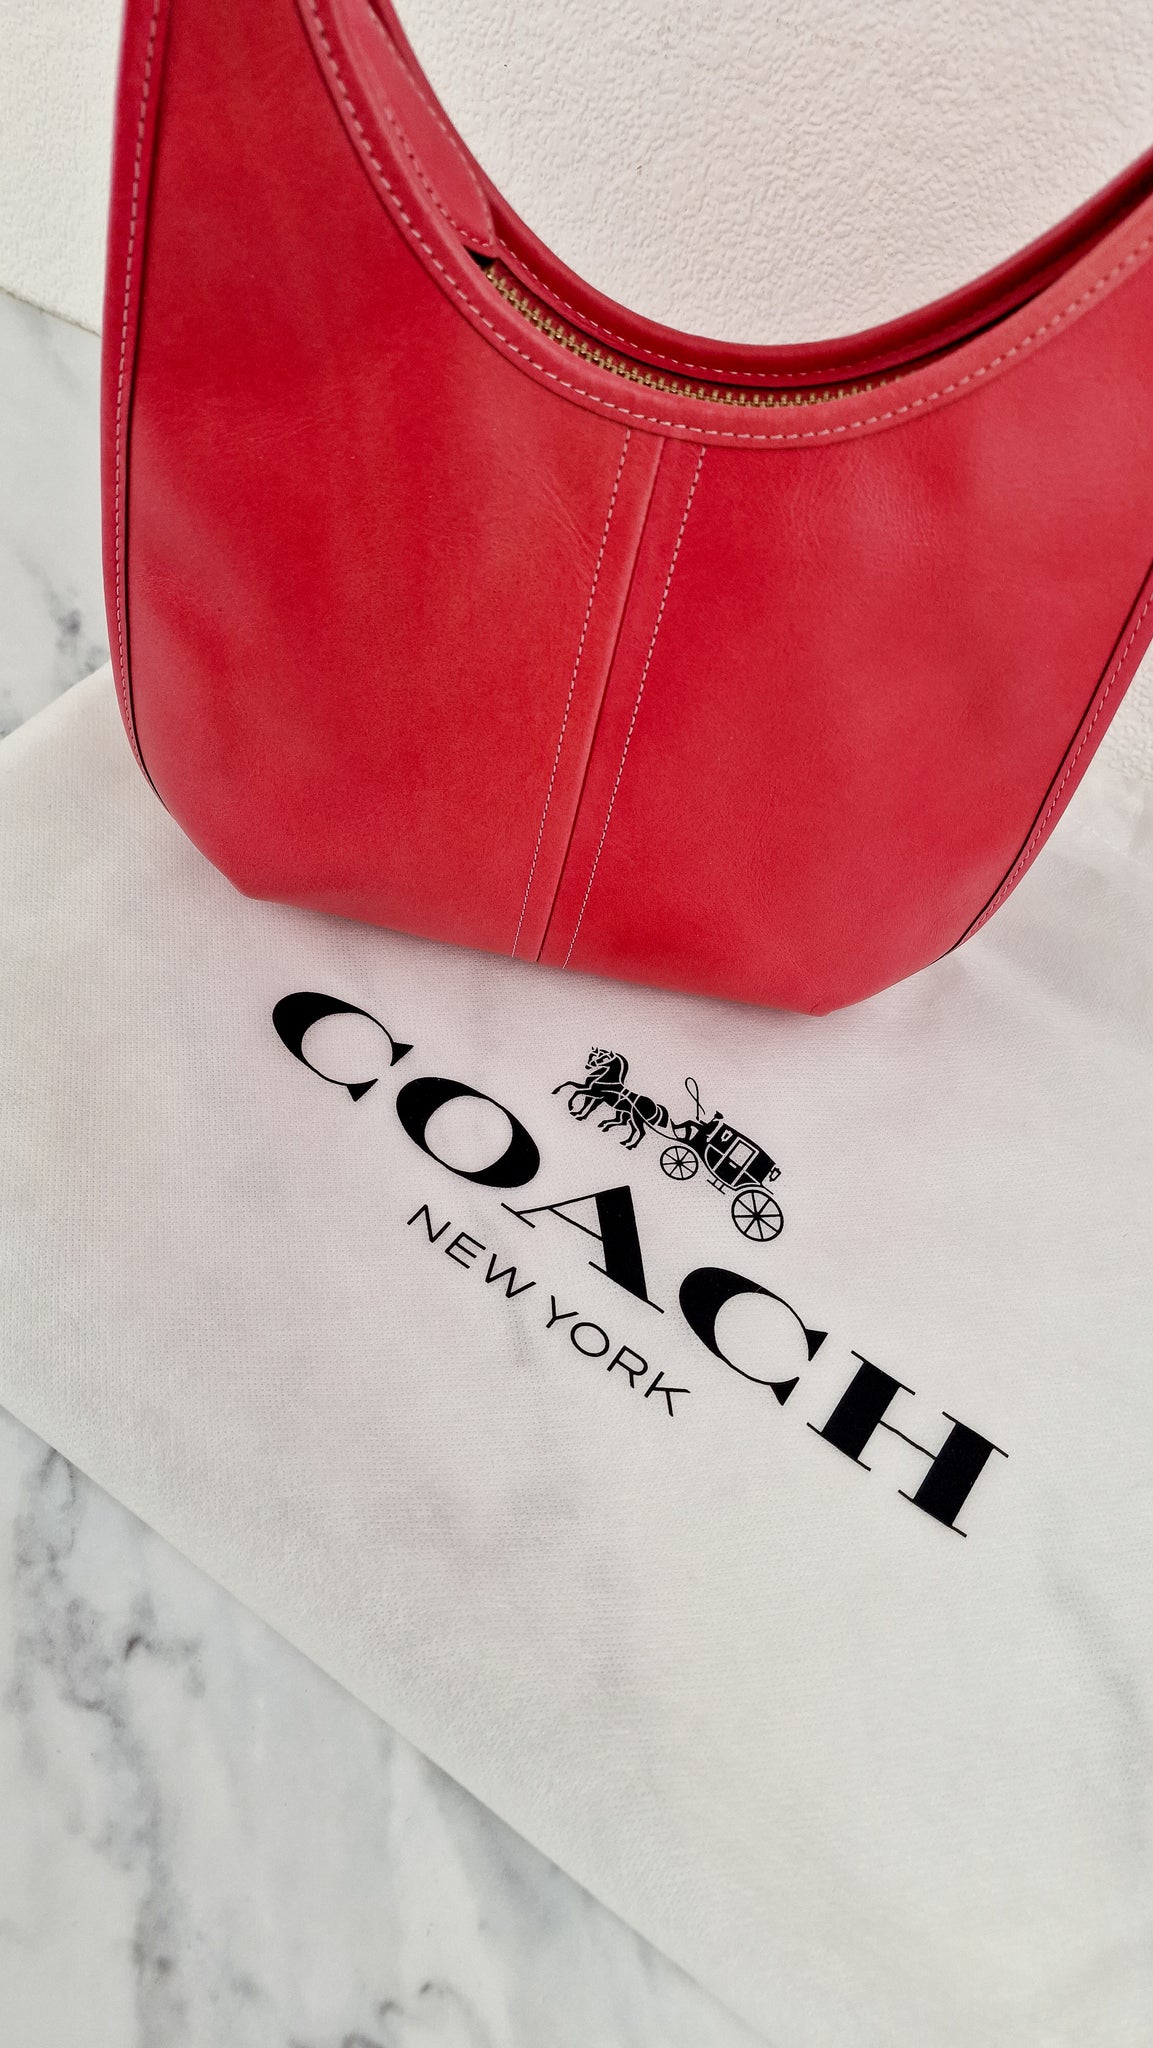 Coach | Bags | Coach Embossed Gallery Tote Pink Coral Patent Leather  Shoulder Bag | Poshmark